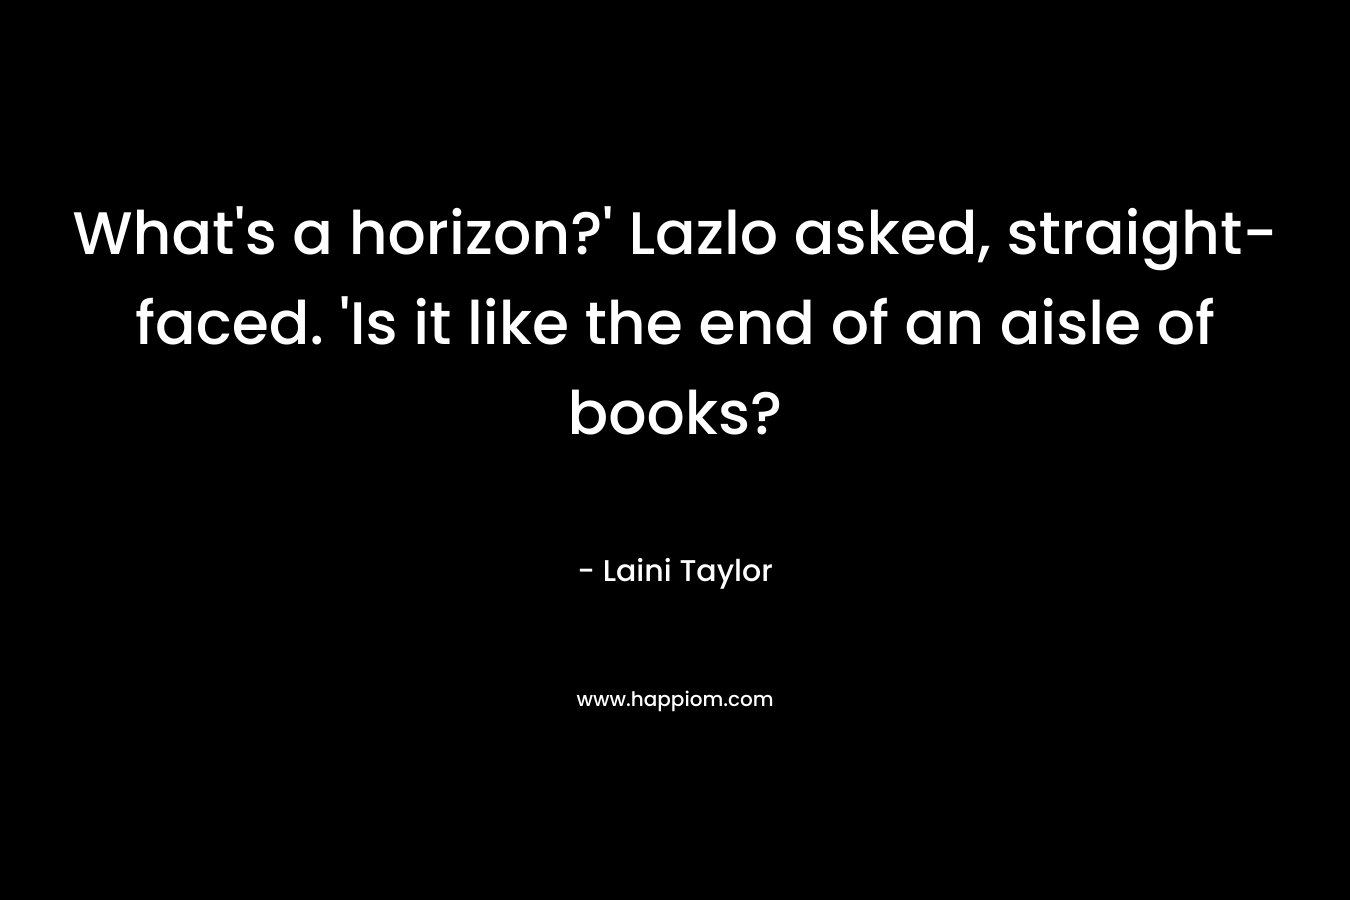 What’s a horizon?’ Lazlo asked, straight-faced. ‘Is it like the end of an aisle of books? – Laini Taylor